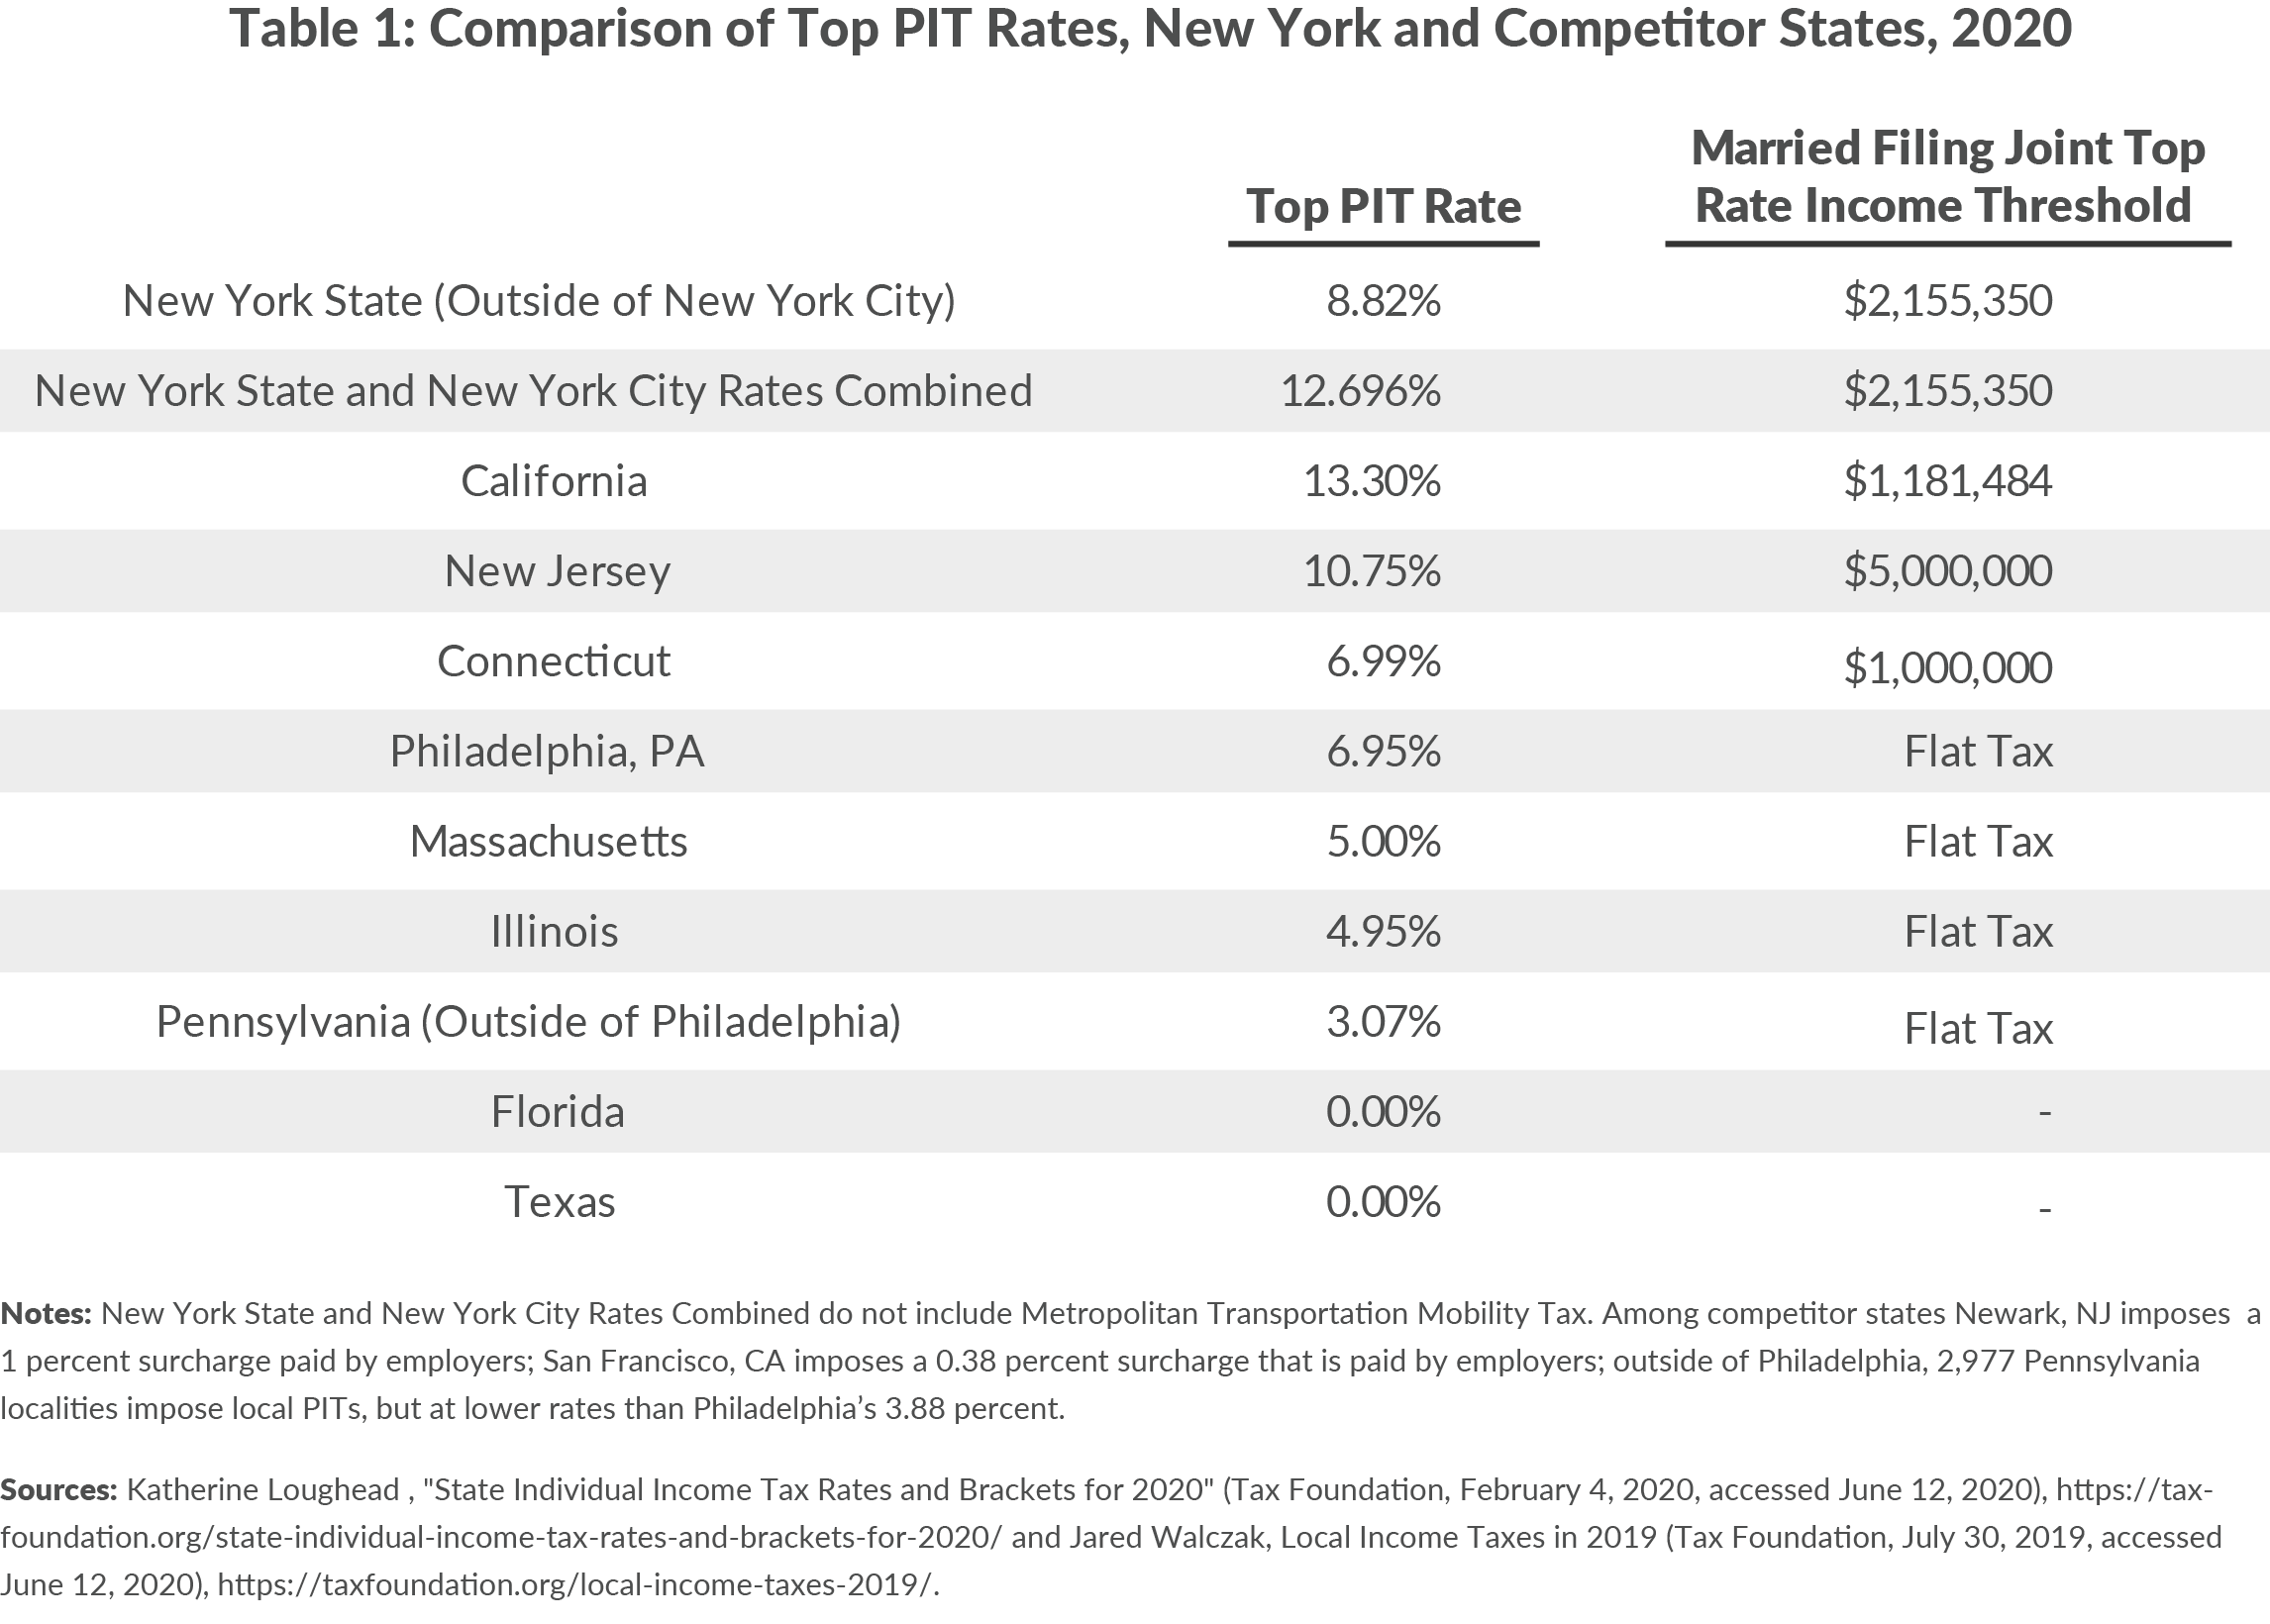 Table 1: Comparison of Top PIT Rates, New York and Competitor States, 2020